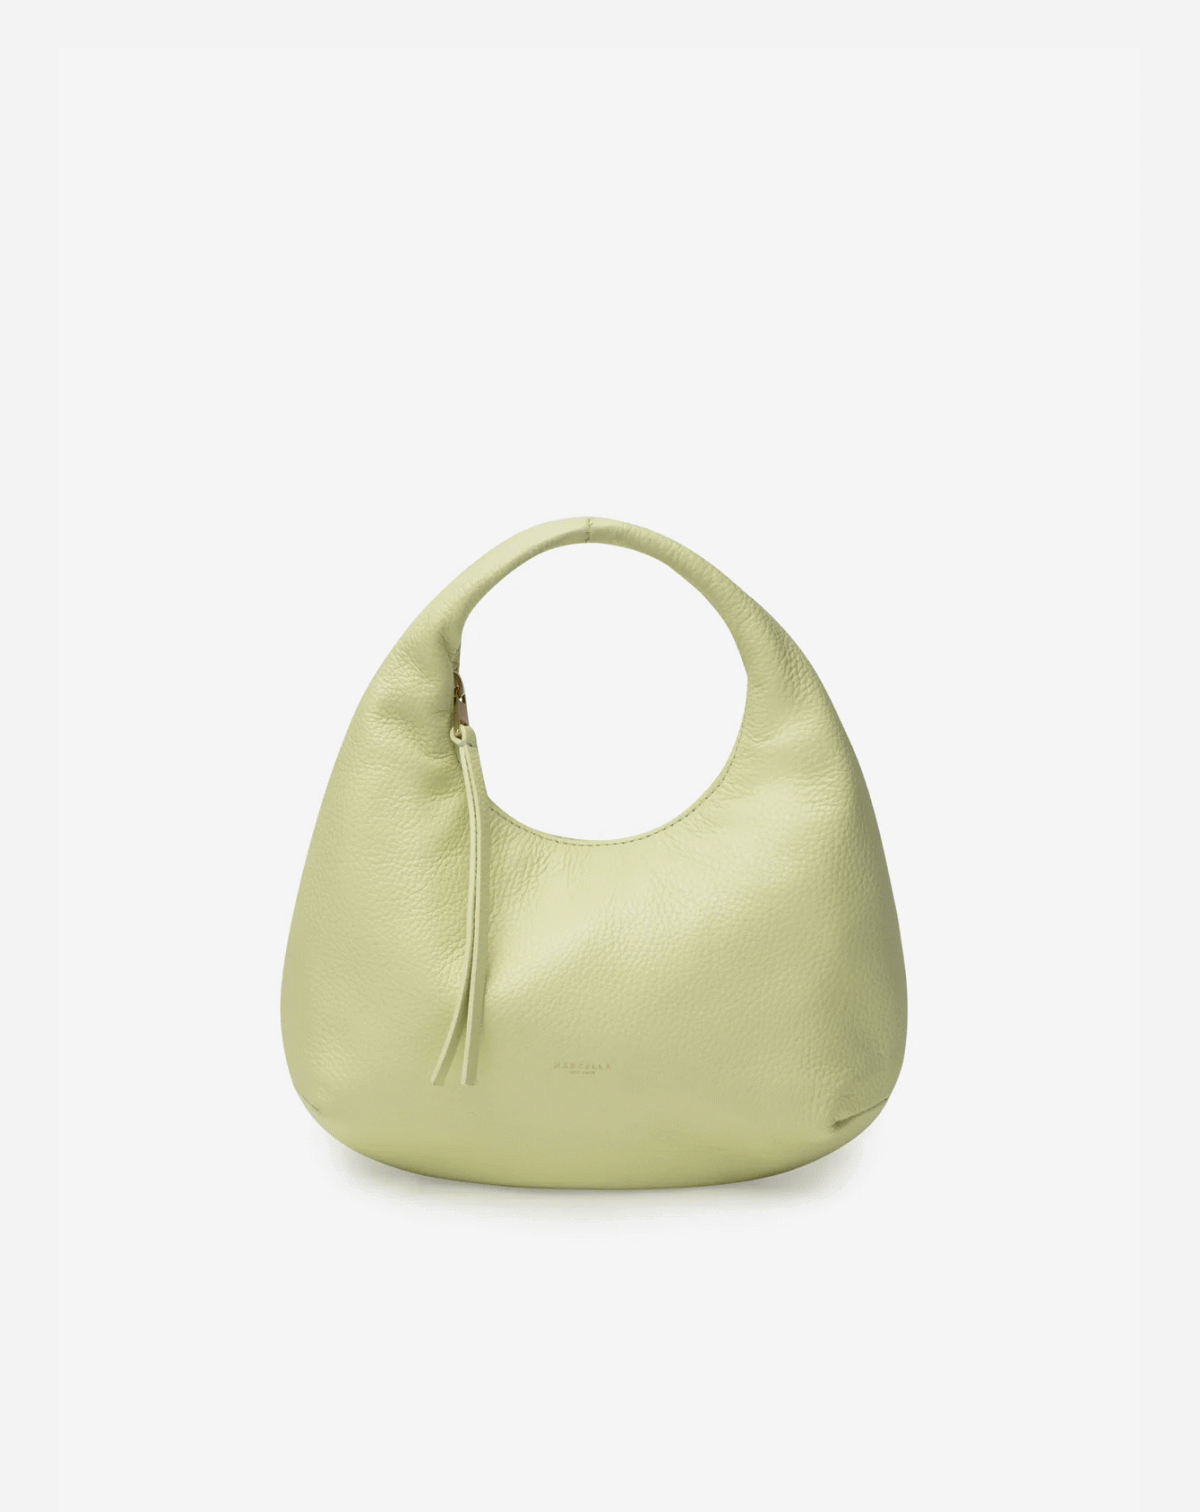 The Dylan Top Handle Purse